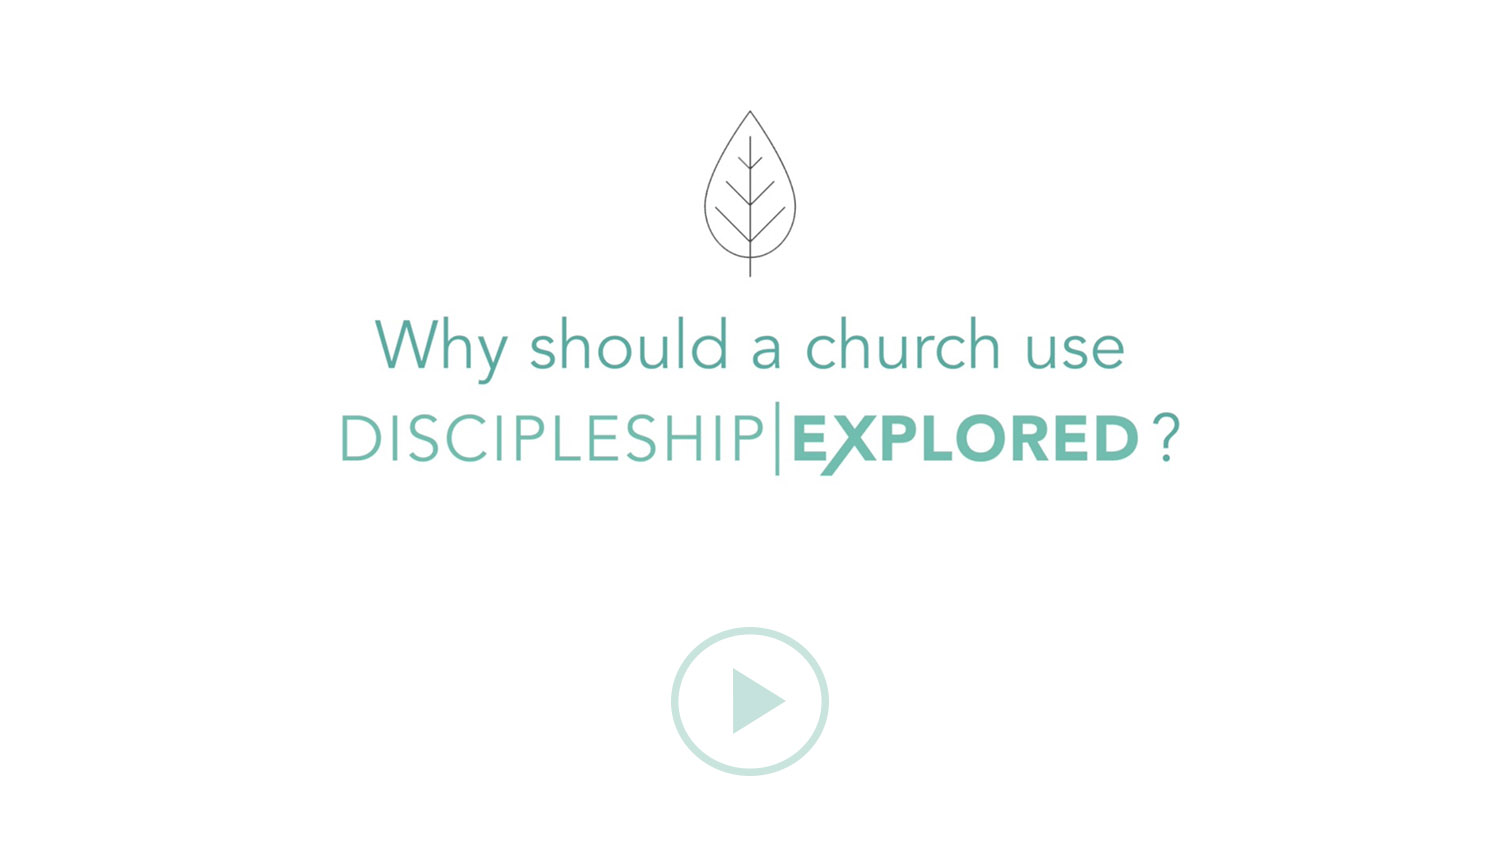 Question 7*Why should a church use Discipleship Explored?